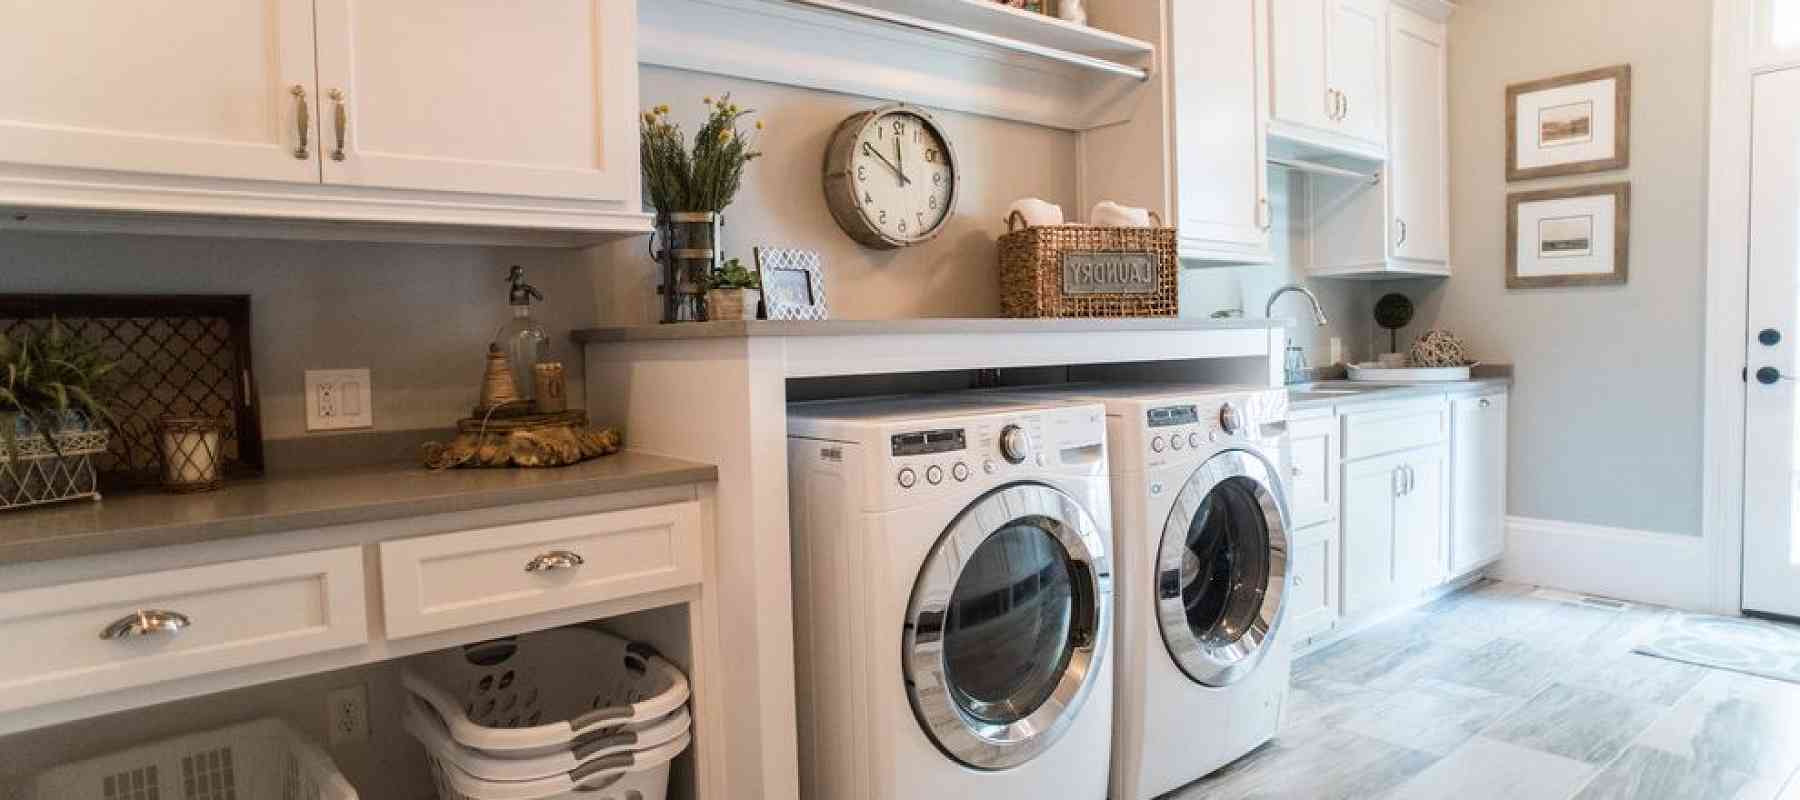 Organizing and Designing the Laundry Room